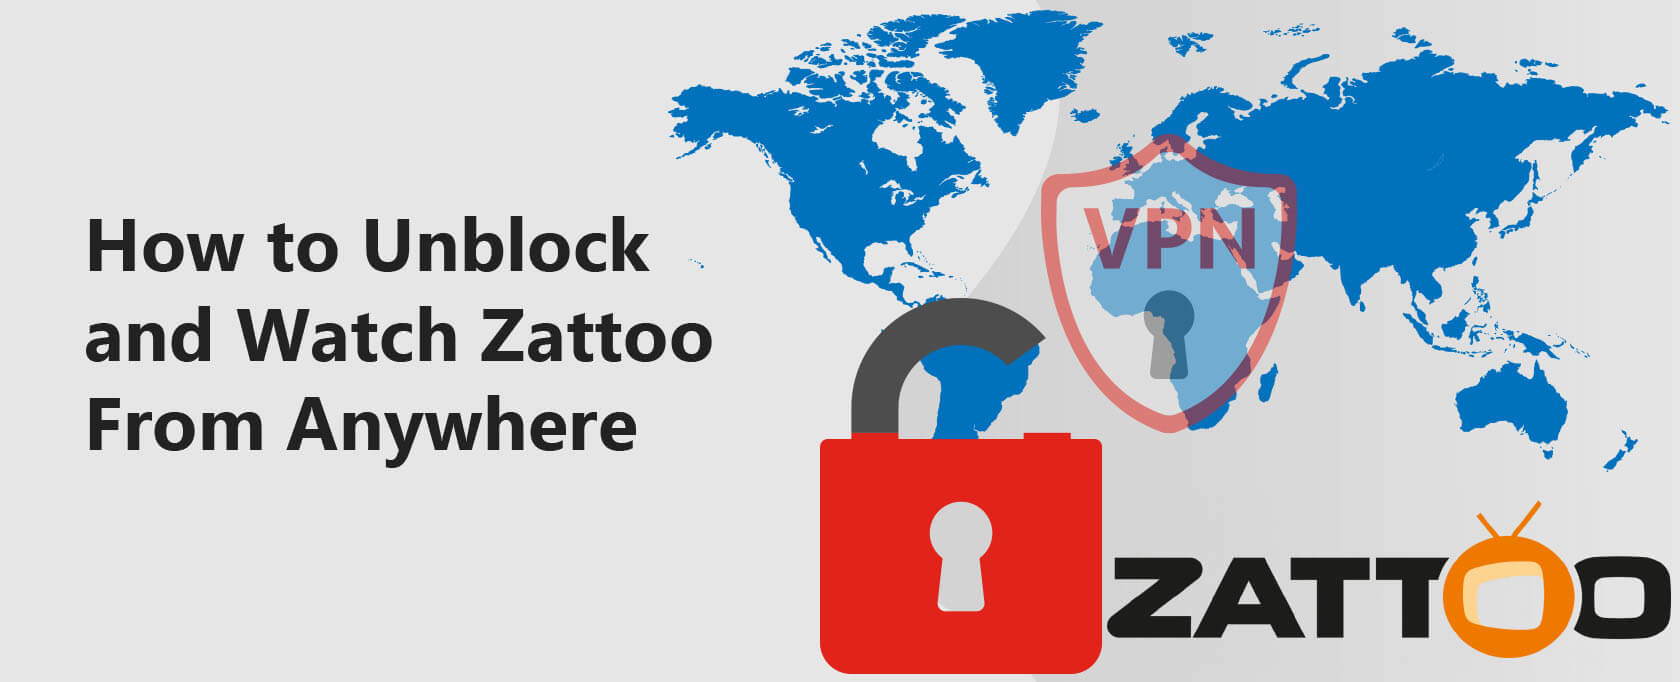 Zattoo VPN: Unblock and Watch Zattoo From Anywhere